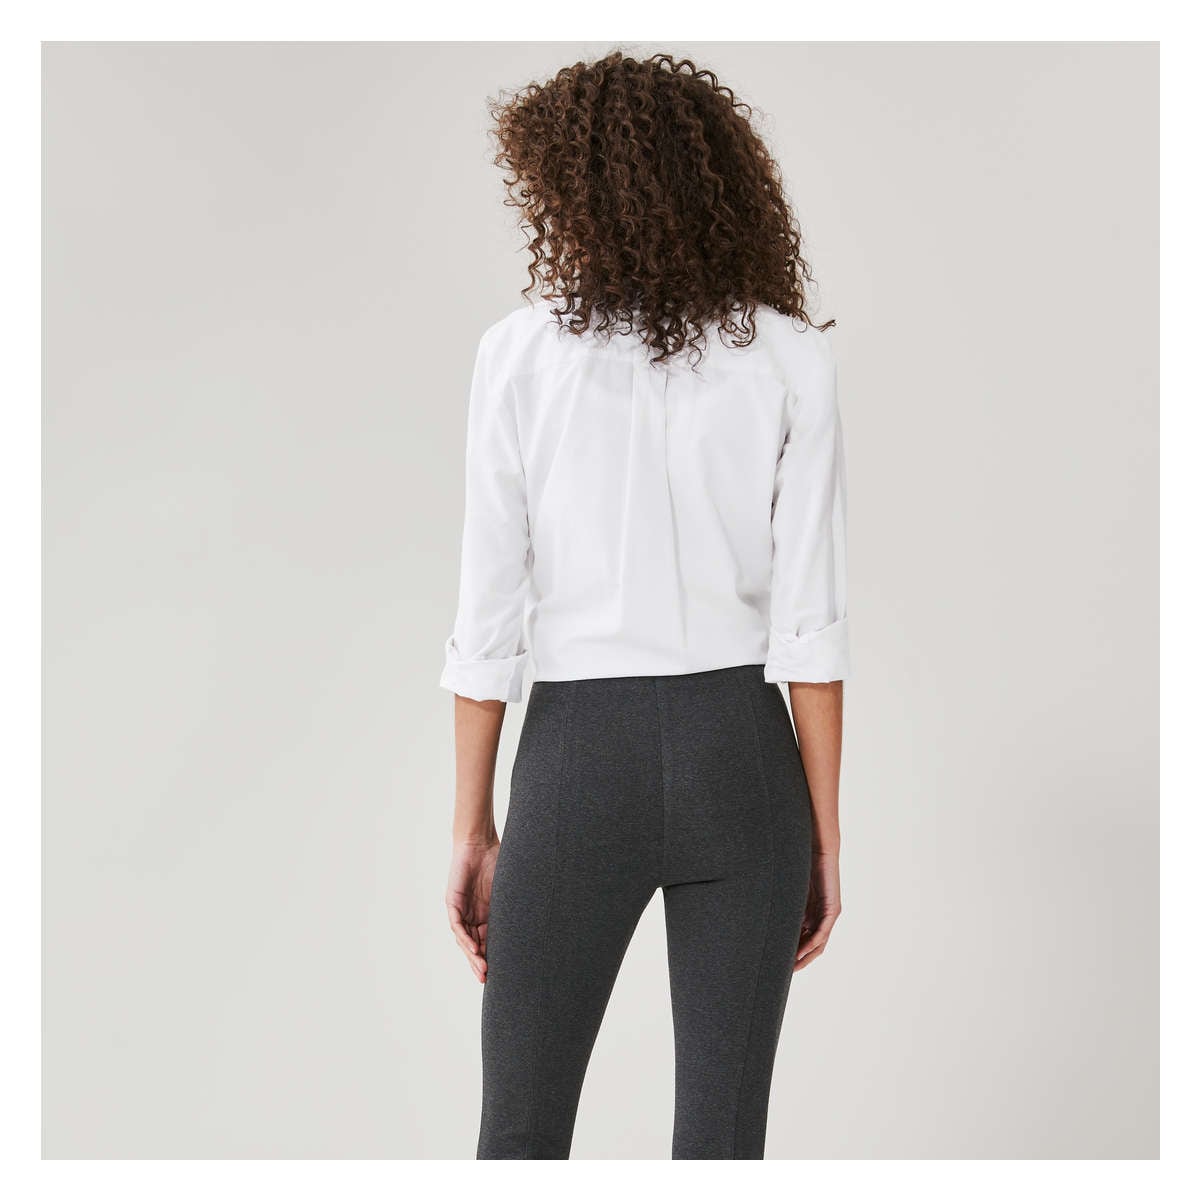 Grey Legging with waist and side pockets for running- Banana Fighter